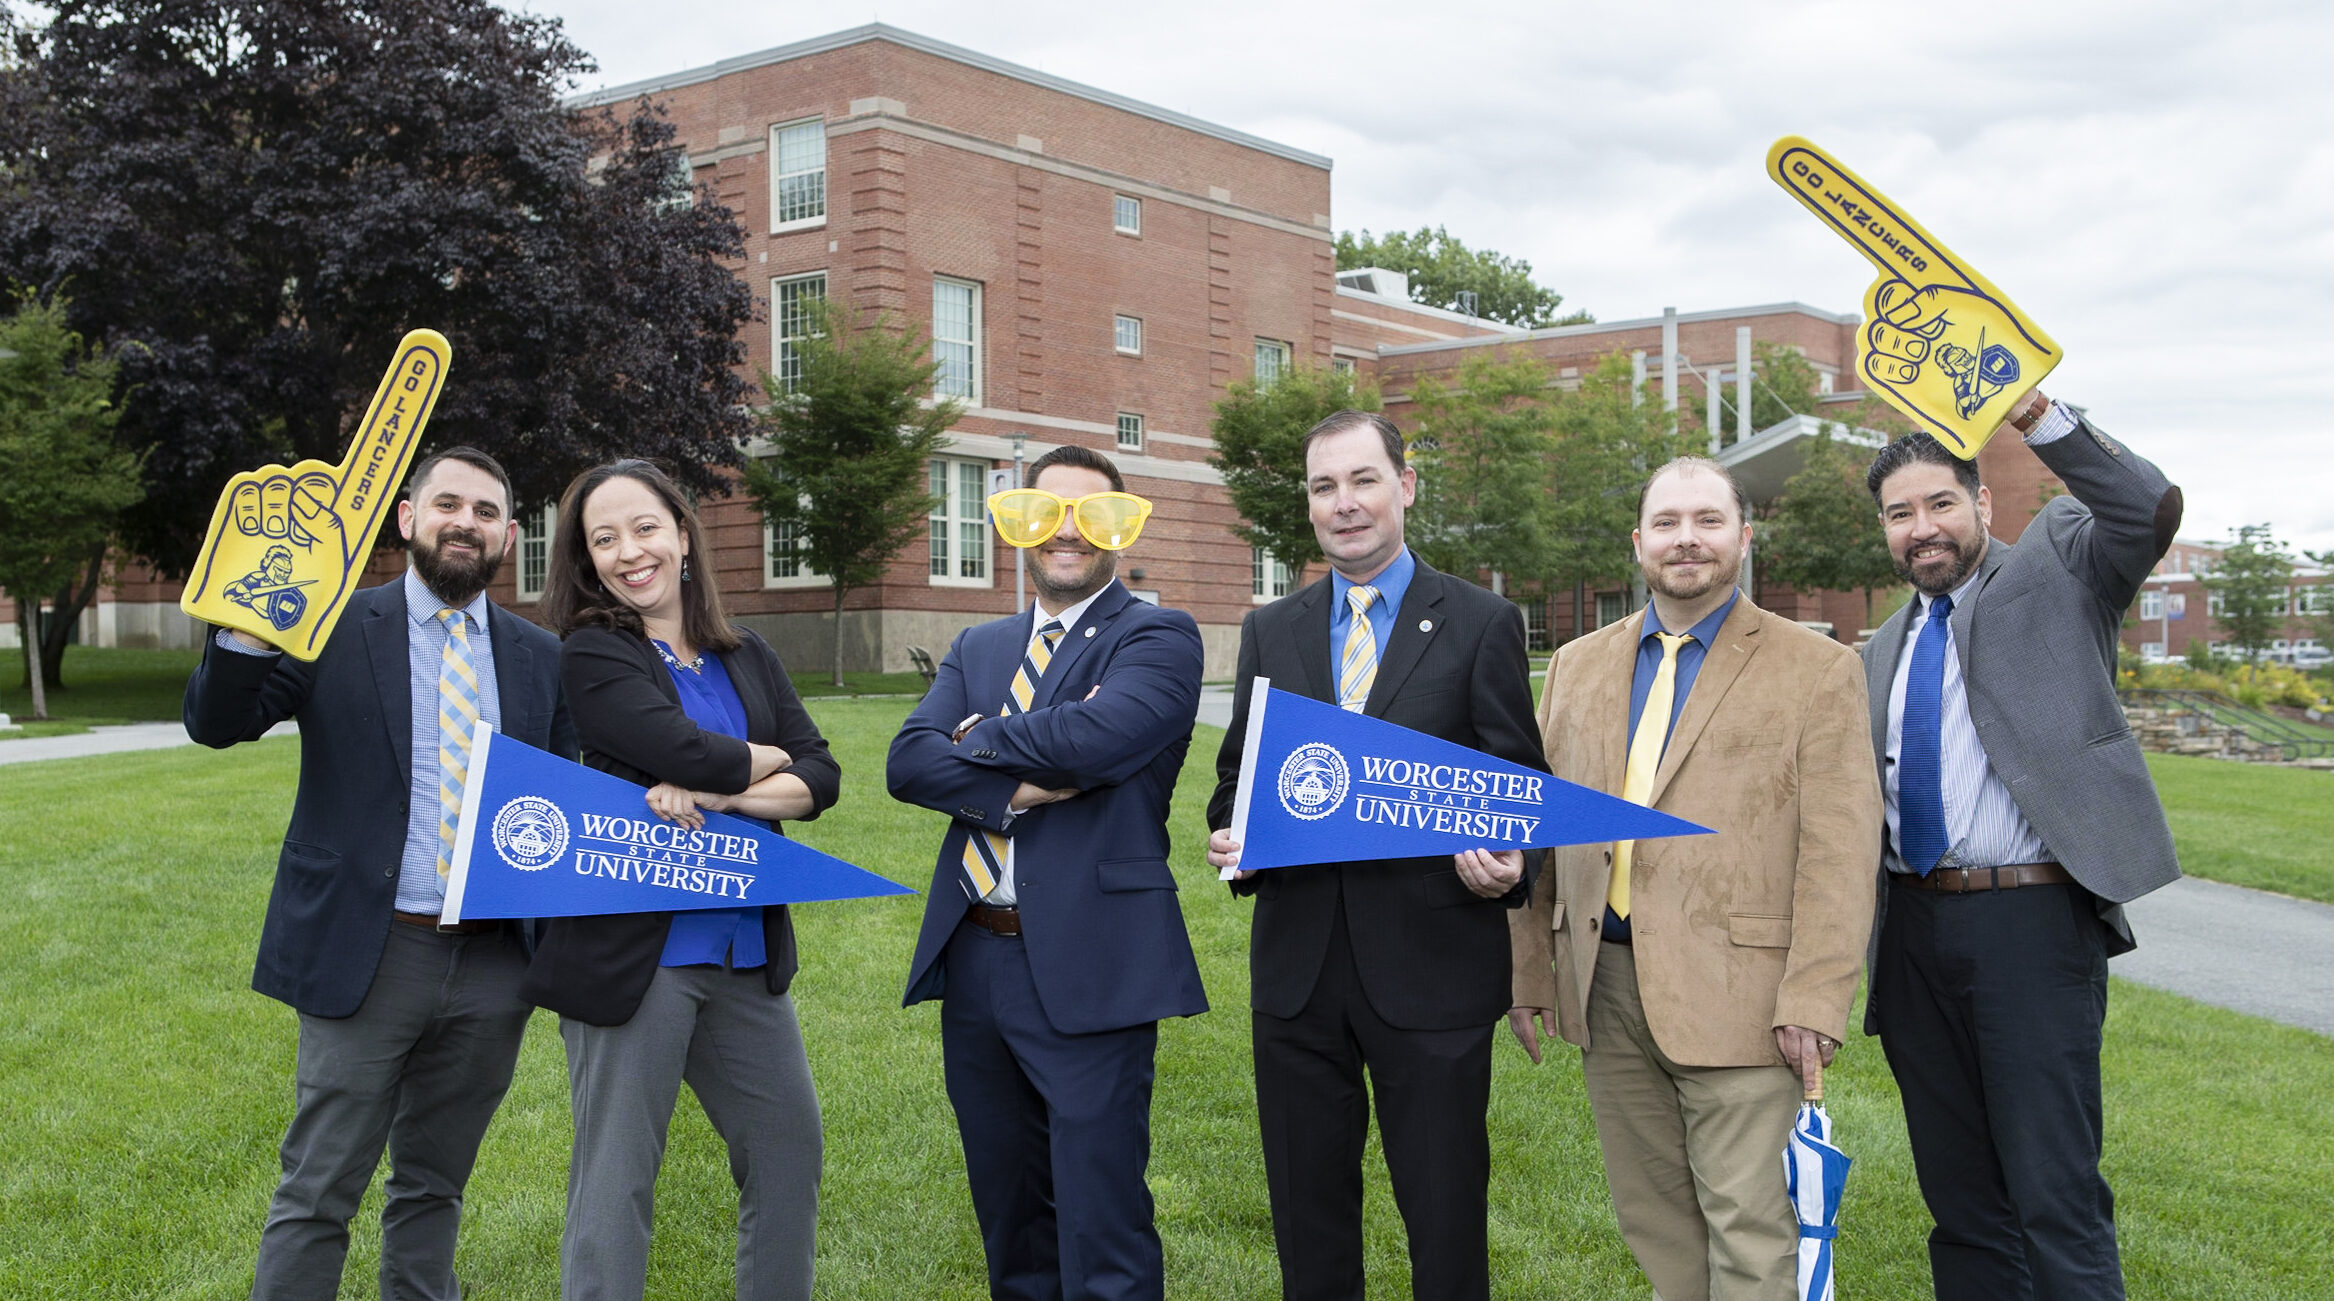 The admissions team at Worcester state representing Lancer pride